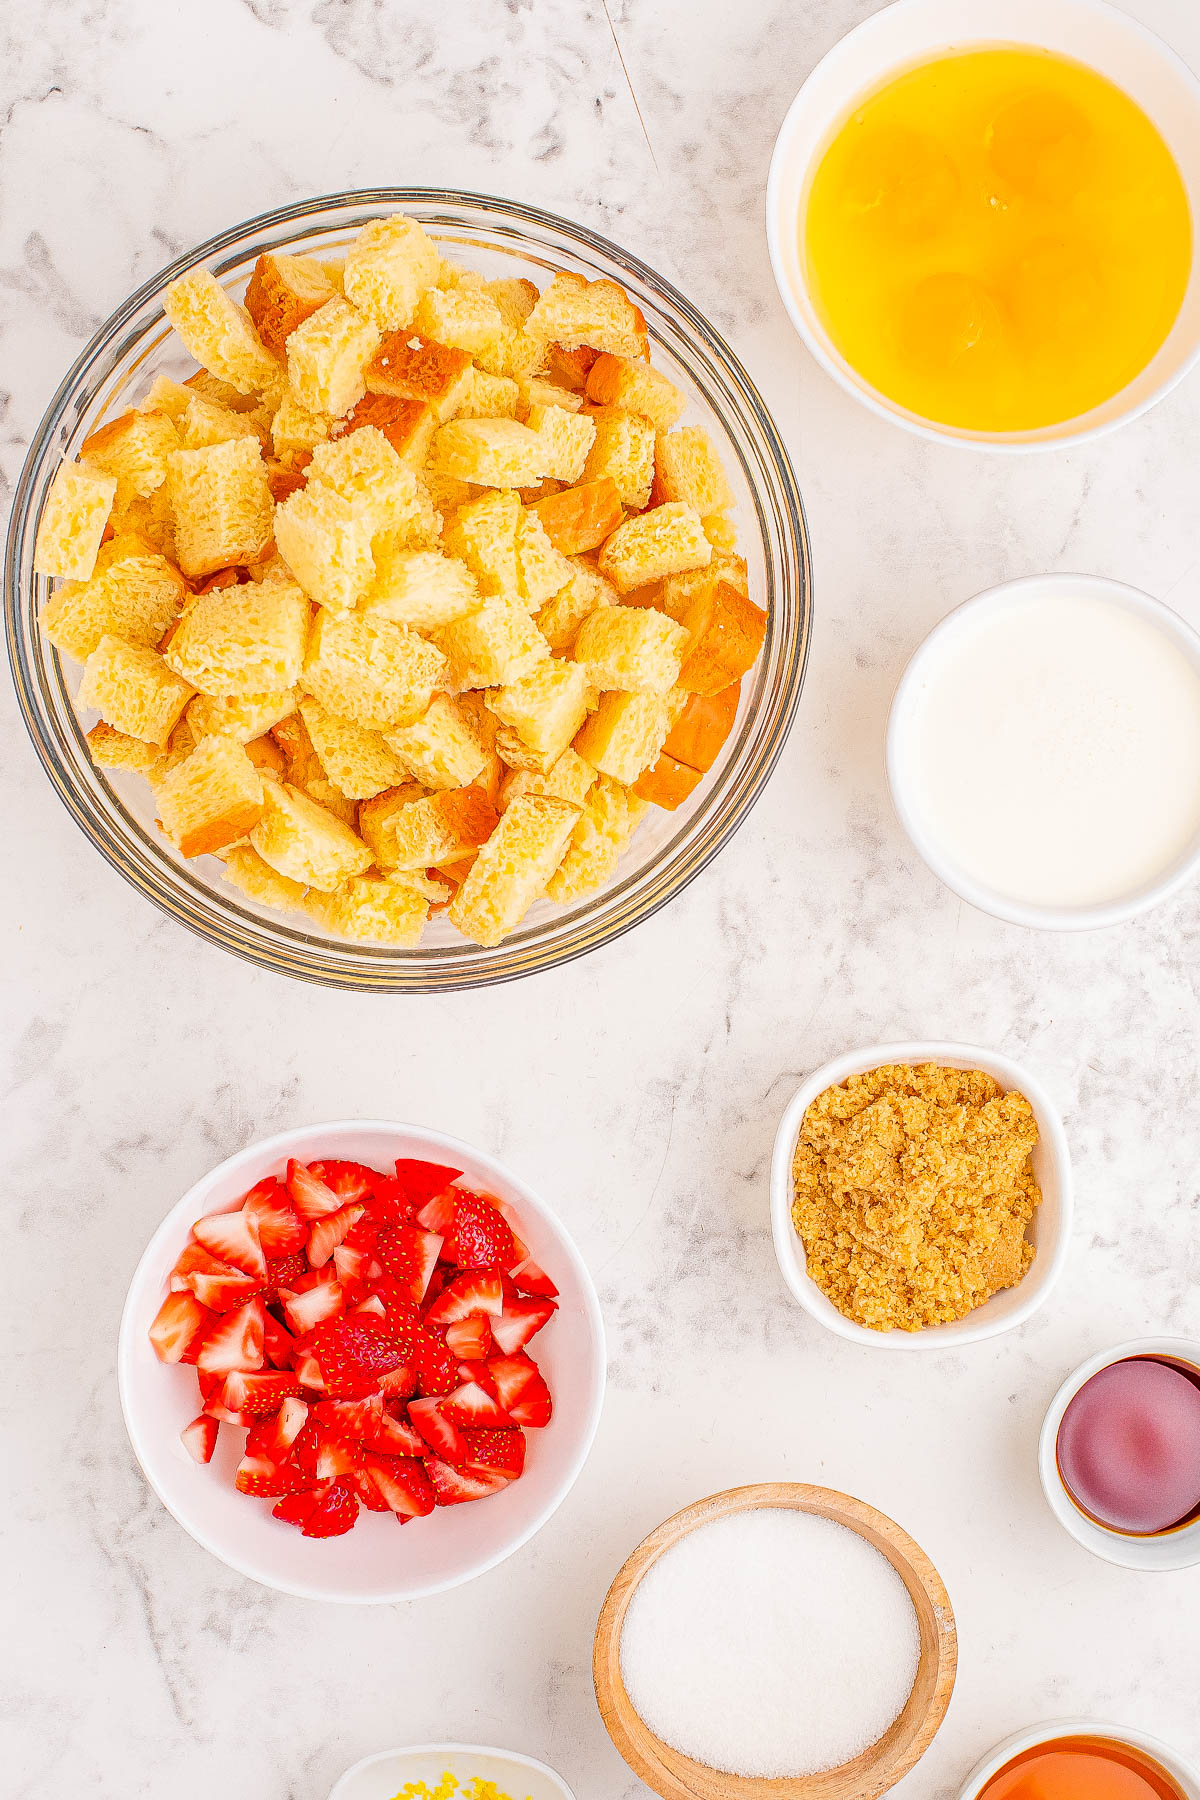 Ingredients for a recipe on a marble countertop include cubed bread, strawberries, eggs, brown sugar, granulated sugar, vanilla extract, milk, and lemon zest.